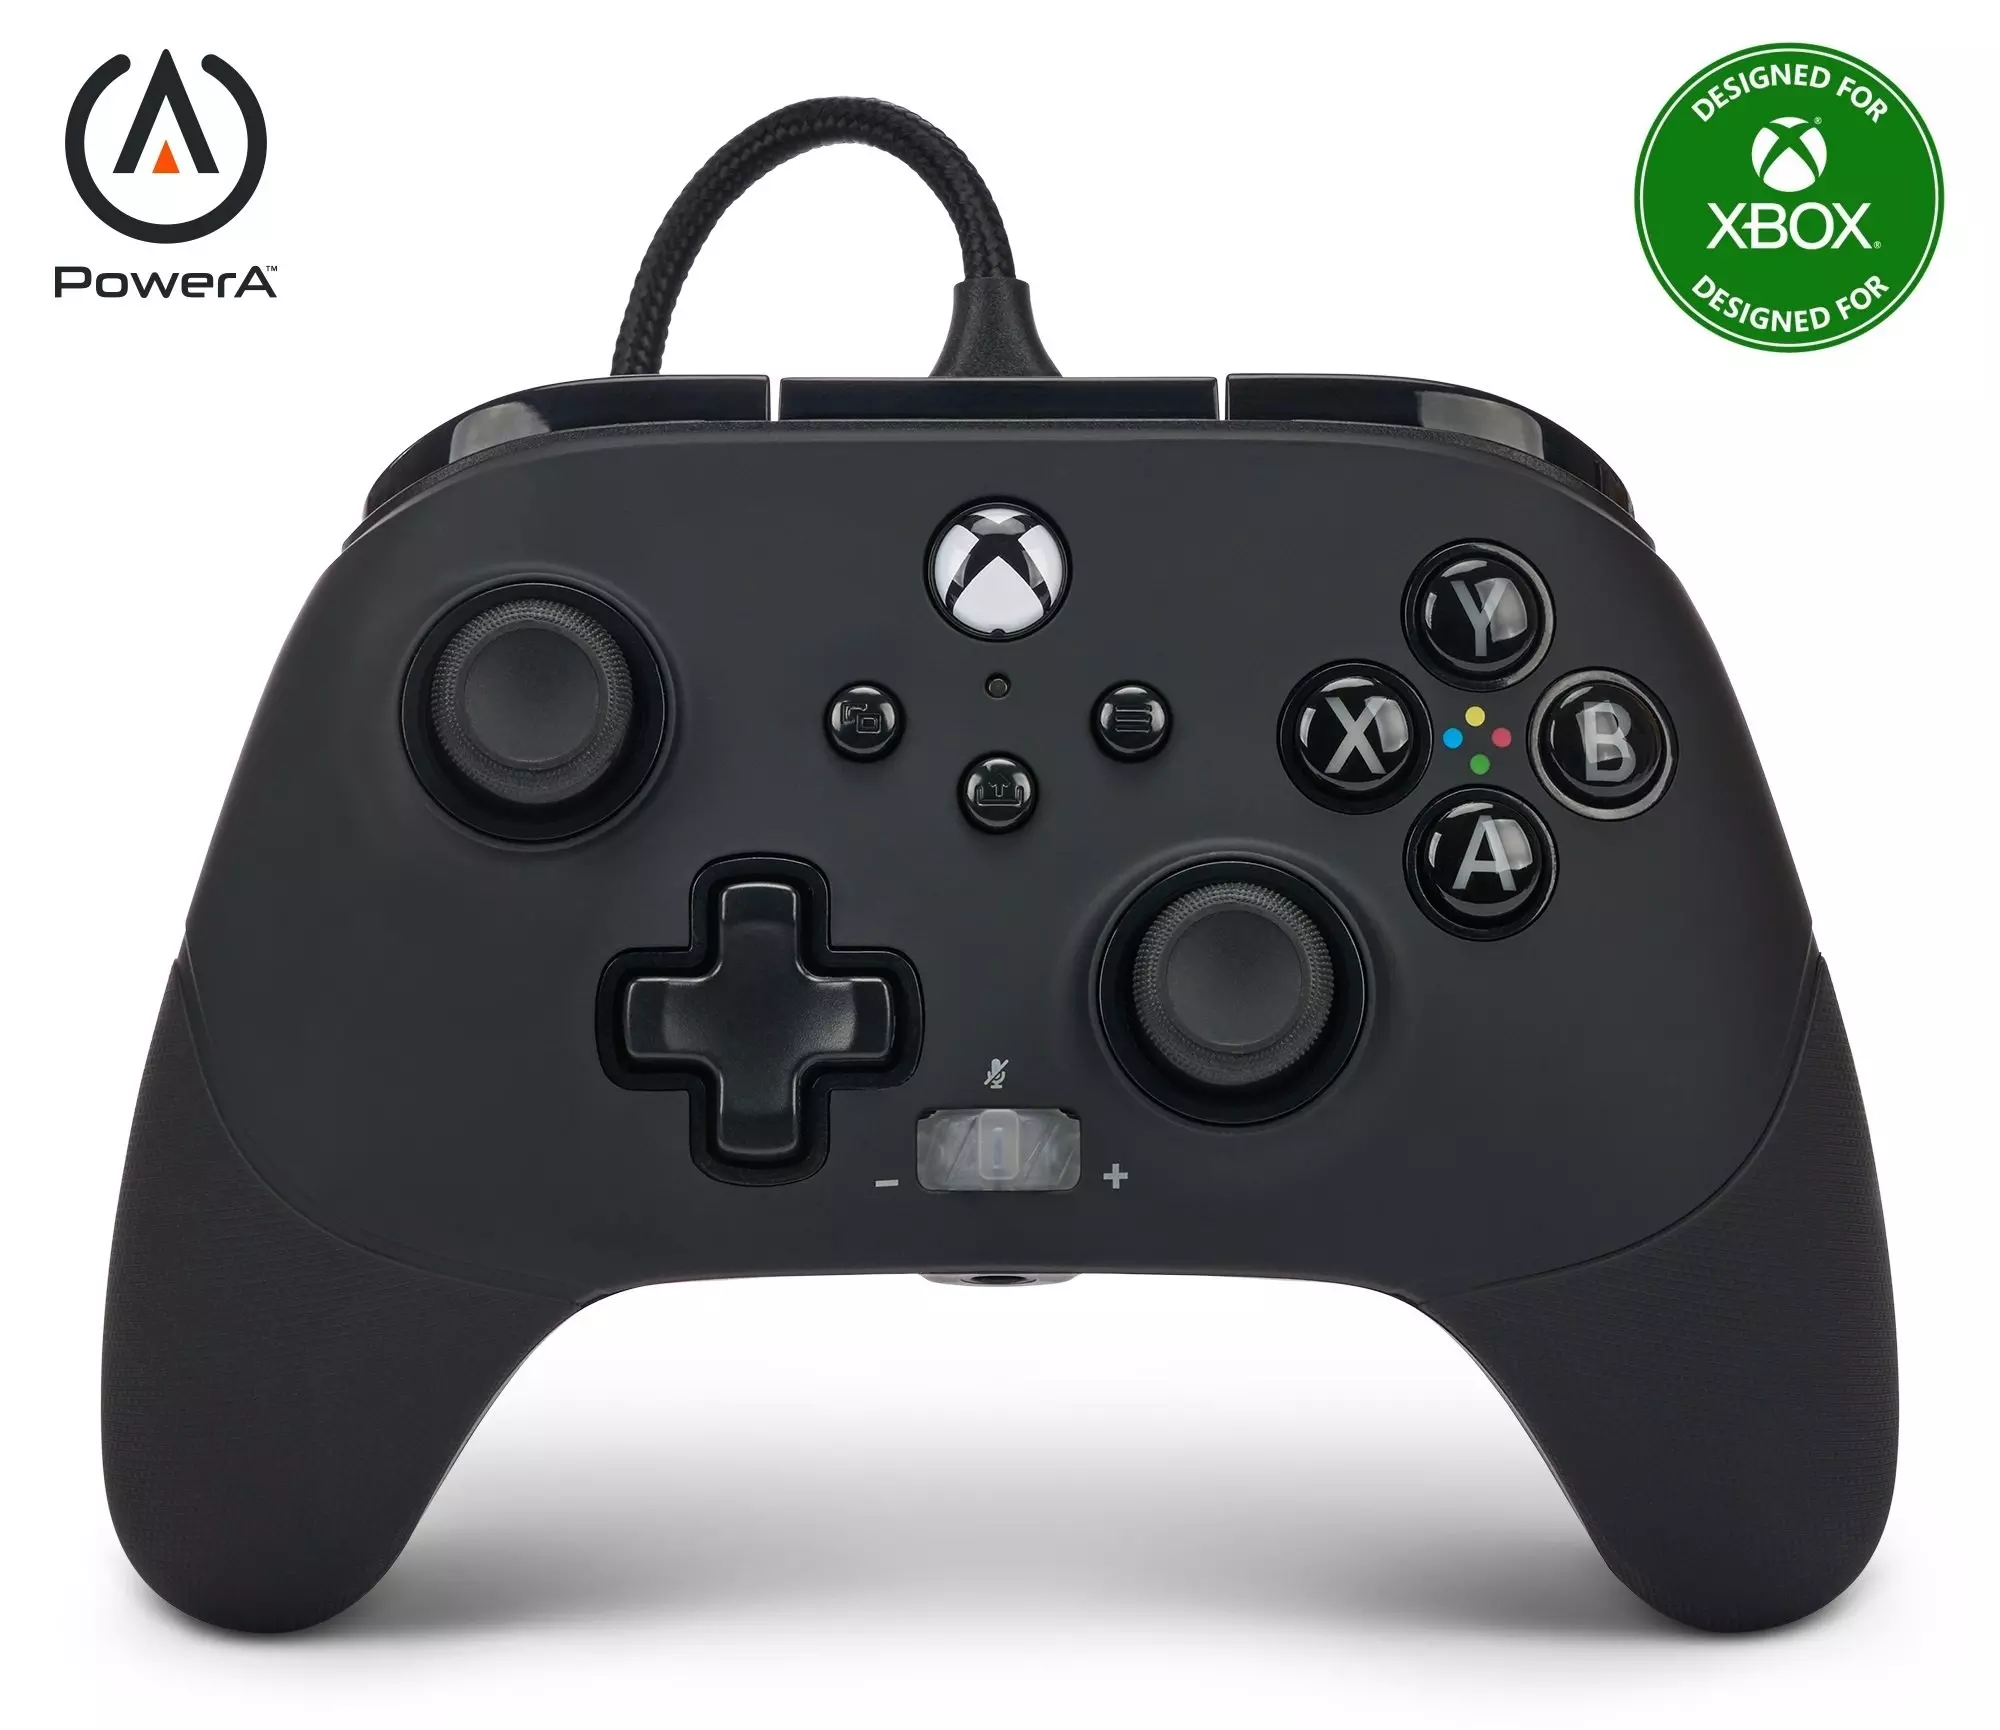 Powera Fusion Pro Wired Controller Xbox